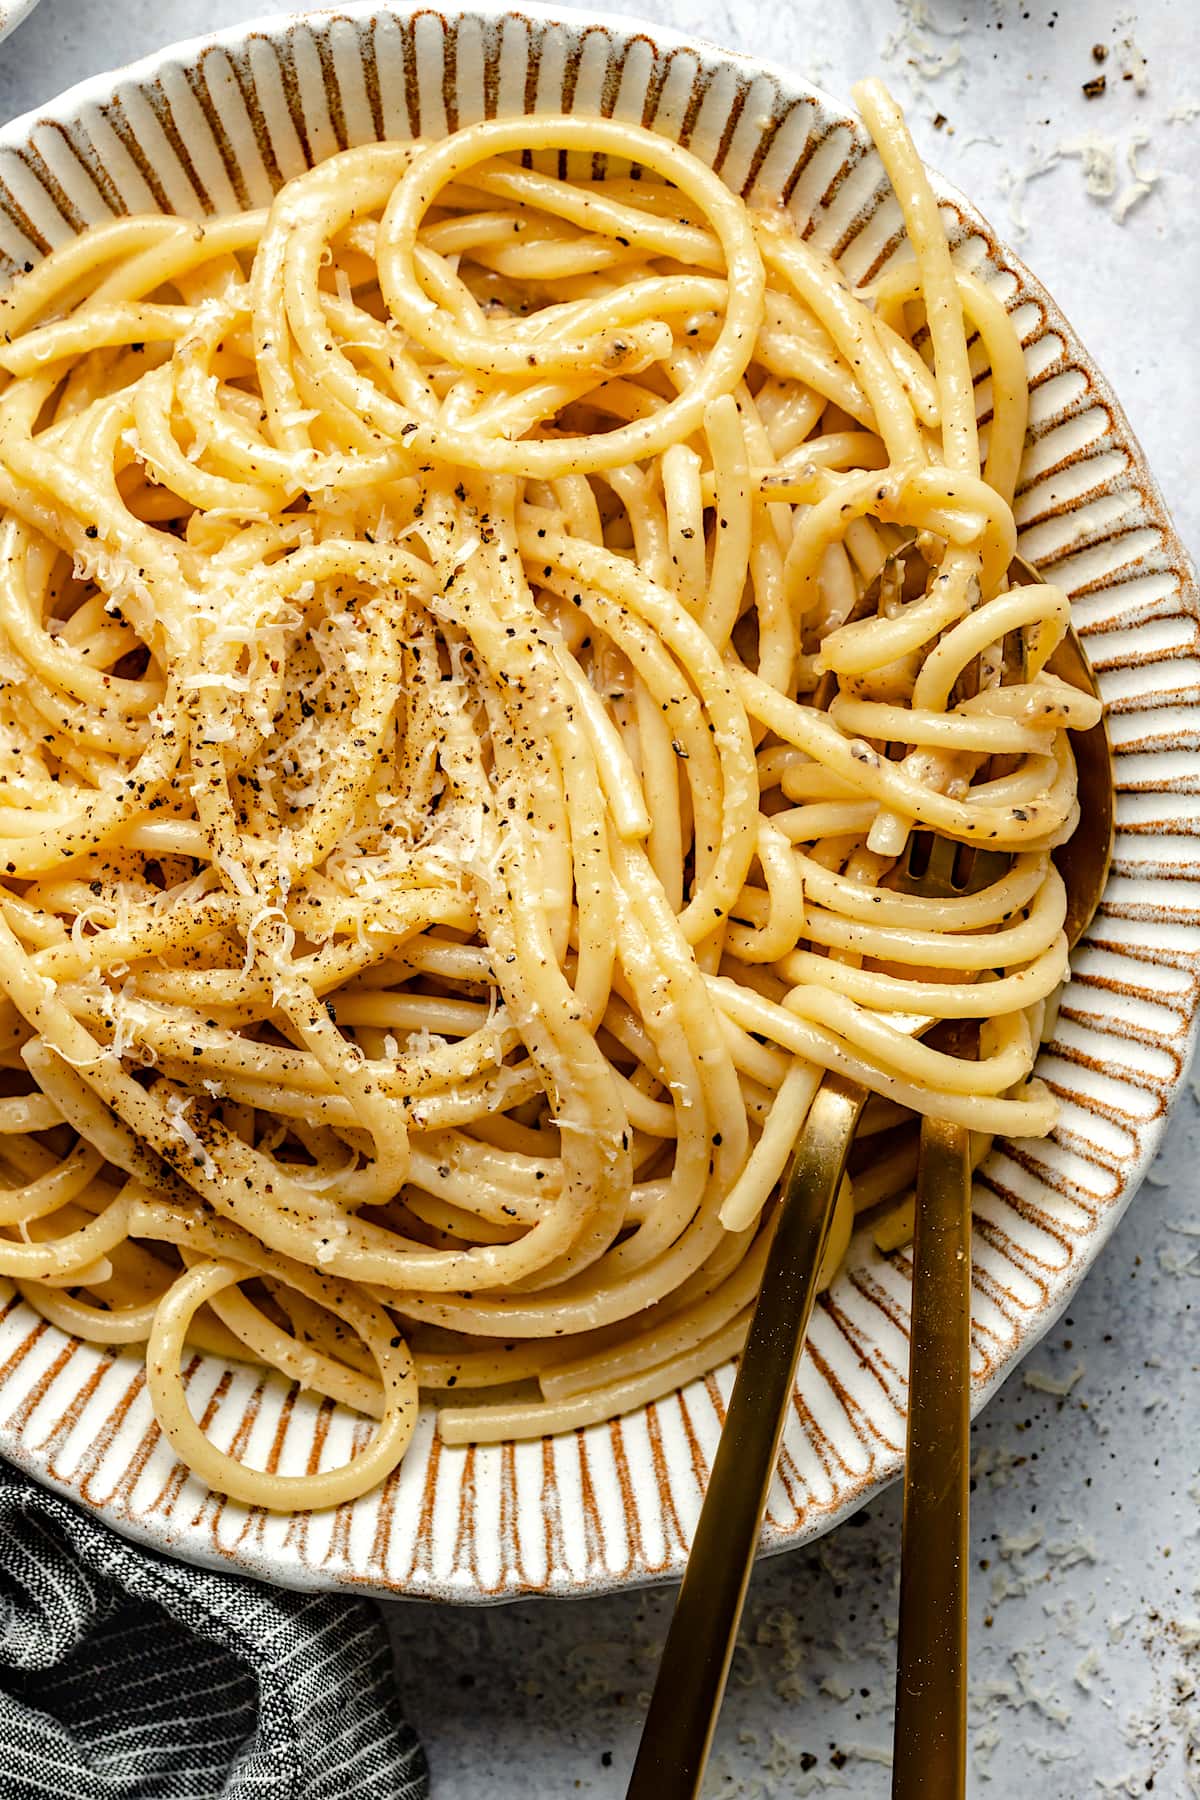 bucatini cacio e pepe pasta in bowl with freshly grated Parmessan cheese.